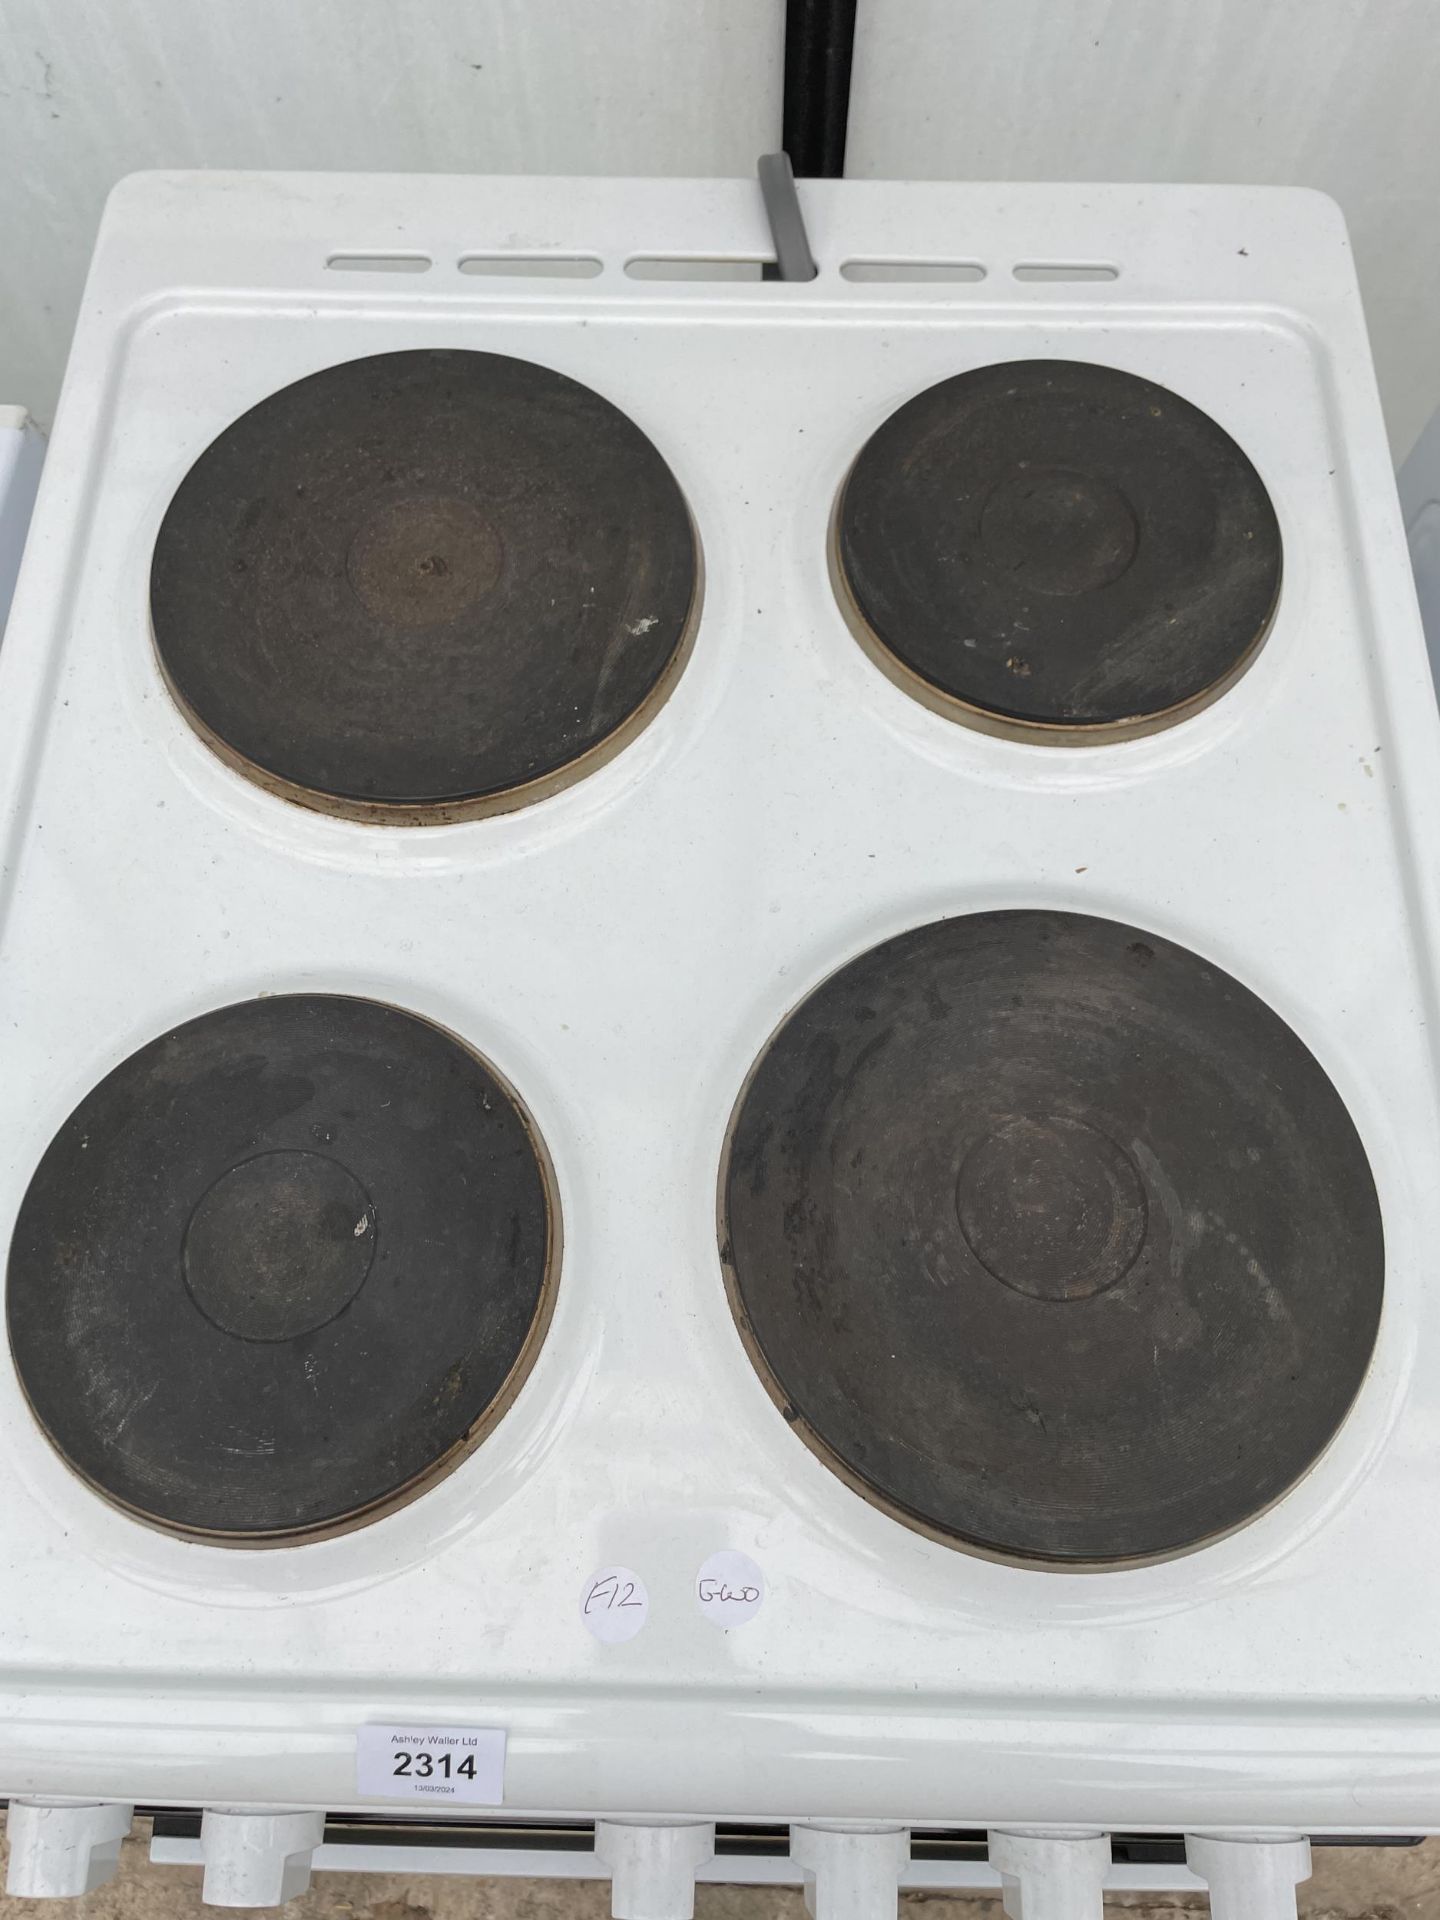 A WHITE AND BLACK SIMFER ELECTRIC OVEN AND HOB - Image 3 of 3